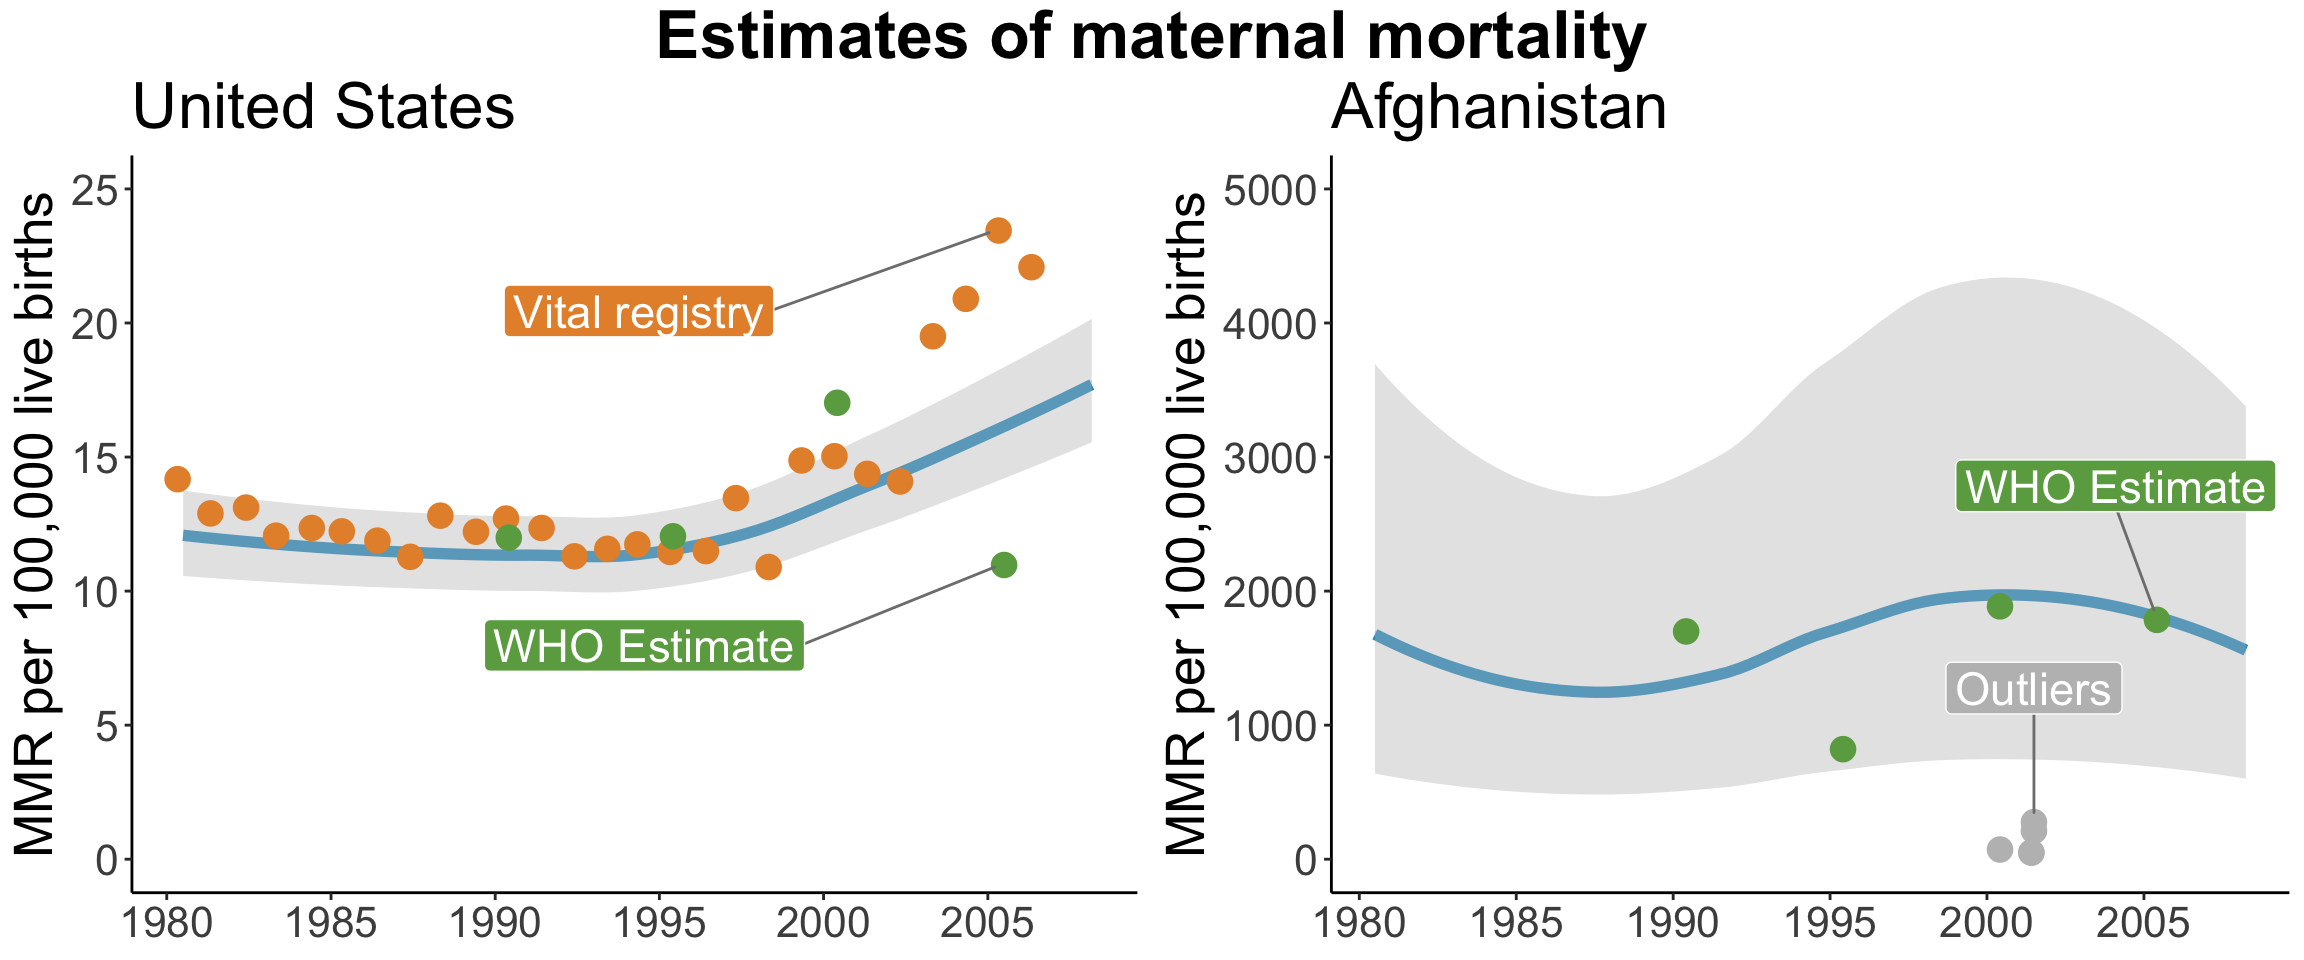 Estimates of the maternal mortality rate in the United States and Afghanistan, [@hogan:2010]. Visualized by Yours Truly based on values extracted from published plots.